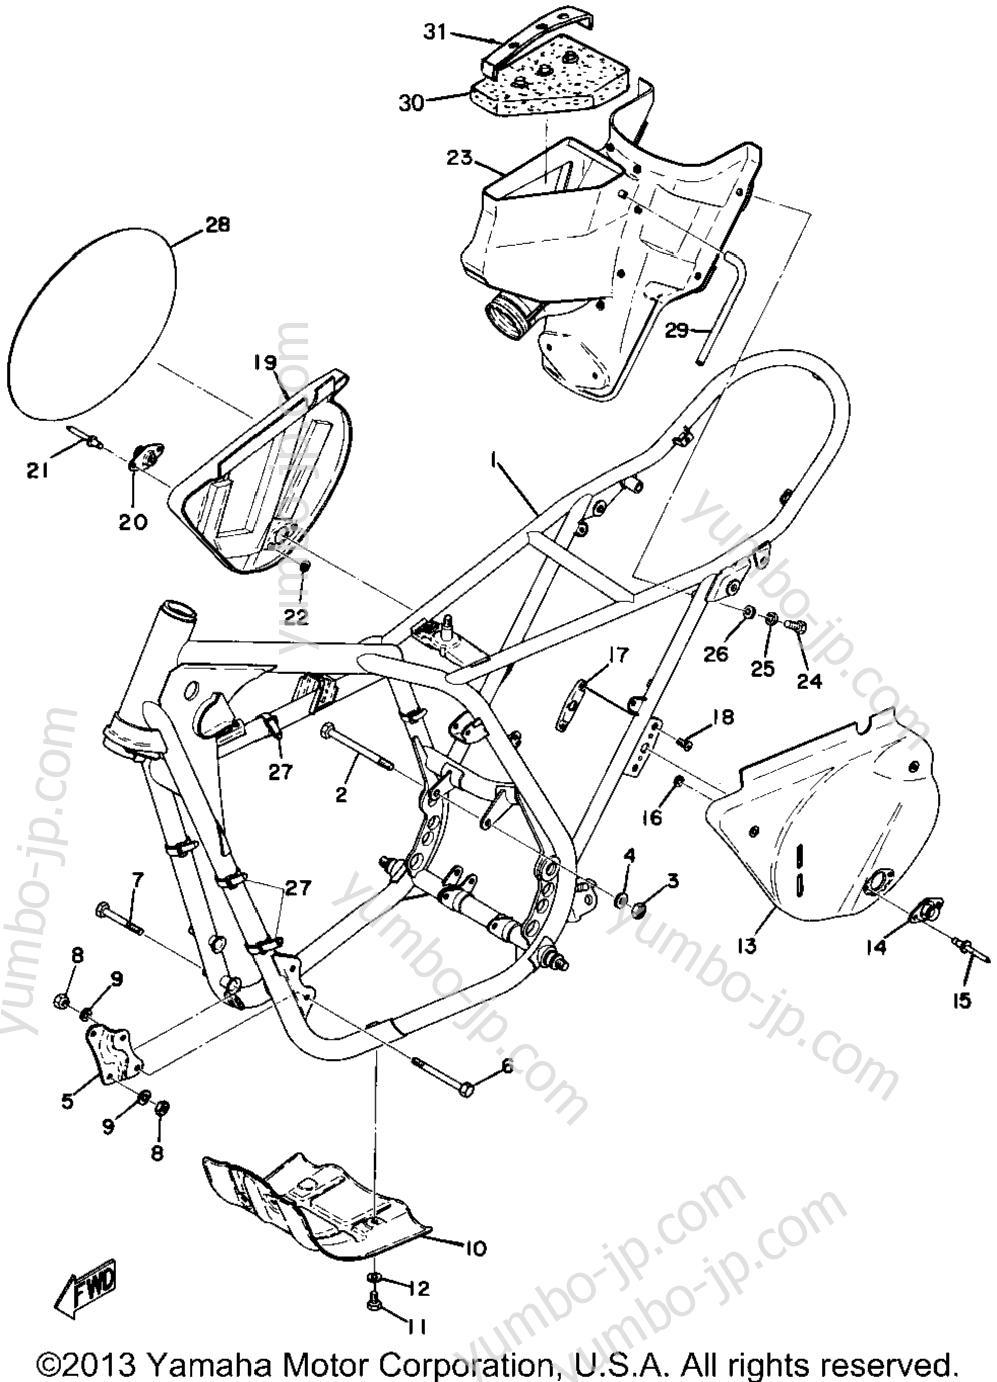 Frame - Side Cover for motorcycles YAMAHA MX360A 1974 year